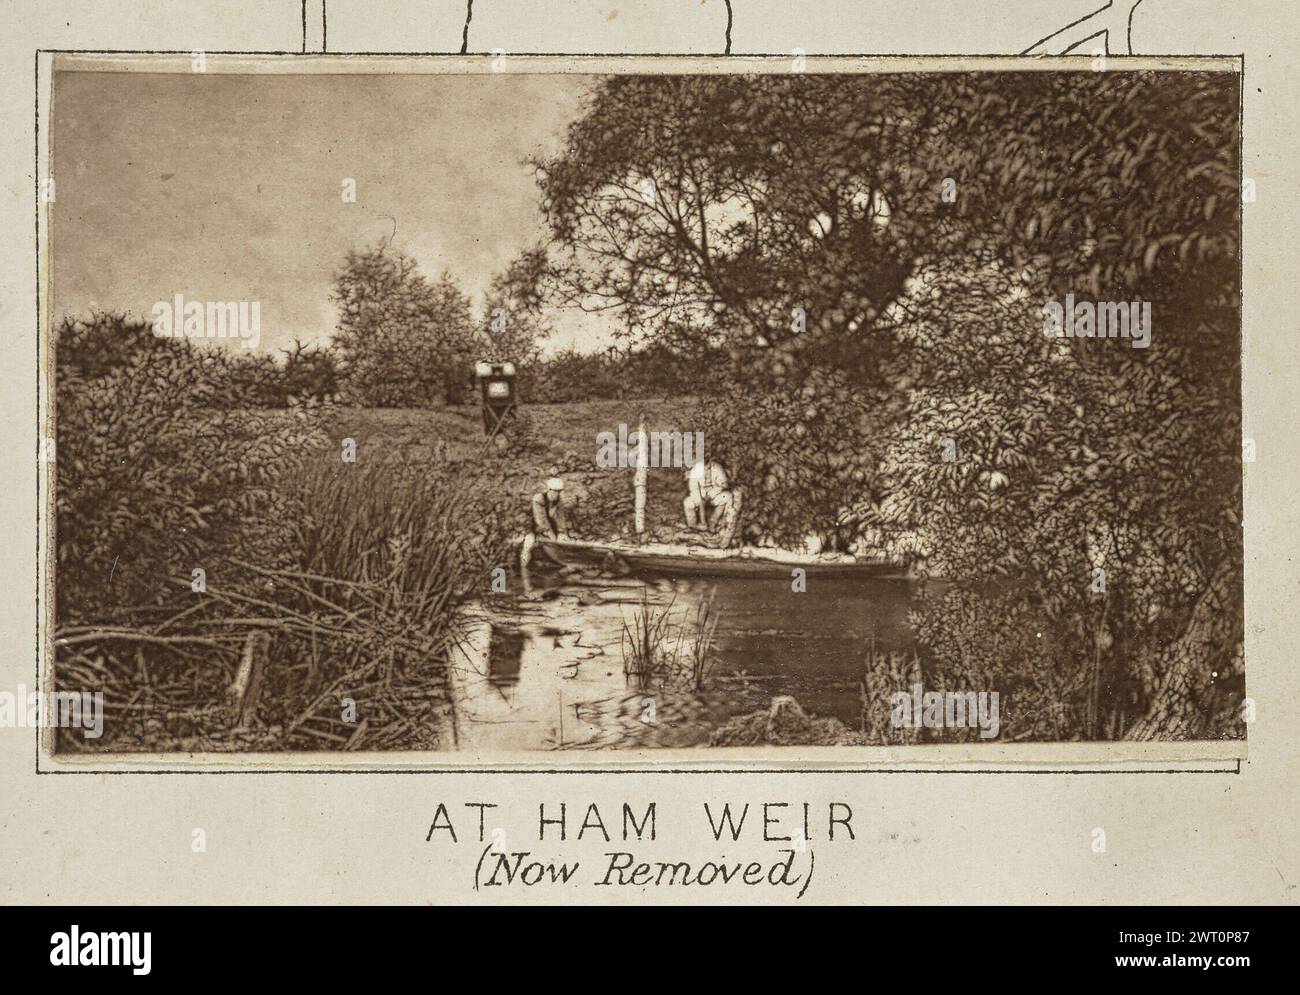 At Ham Weir (Now Removed). Henry W. Taunt, photographer (British, 1842 - 1922) about 1886 One of three tipped-in photographs illustrating a printed map of Castle Eaton, Kempsford, and the surrounding area along the River Thames. The photograph shows a view of Henry Taunt crouched on the bank of the river at a small weir, or dam. Taunt holds the bow of a canoe floating on the water as a second man crouches near him on the riverbank. Taunt's photographic tent stands in a field behind the men. (Recto, mount) lower center, below image, printed in black ink: 'AT HAM WEIR / (Now Removed) [italicized Stock Photo